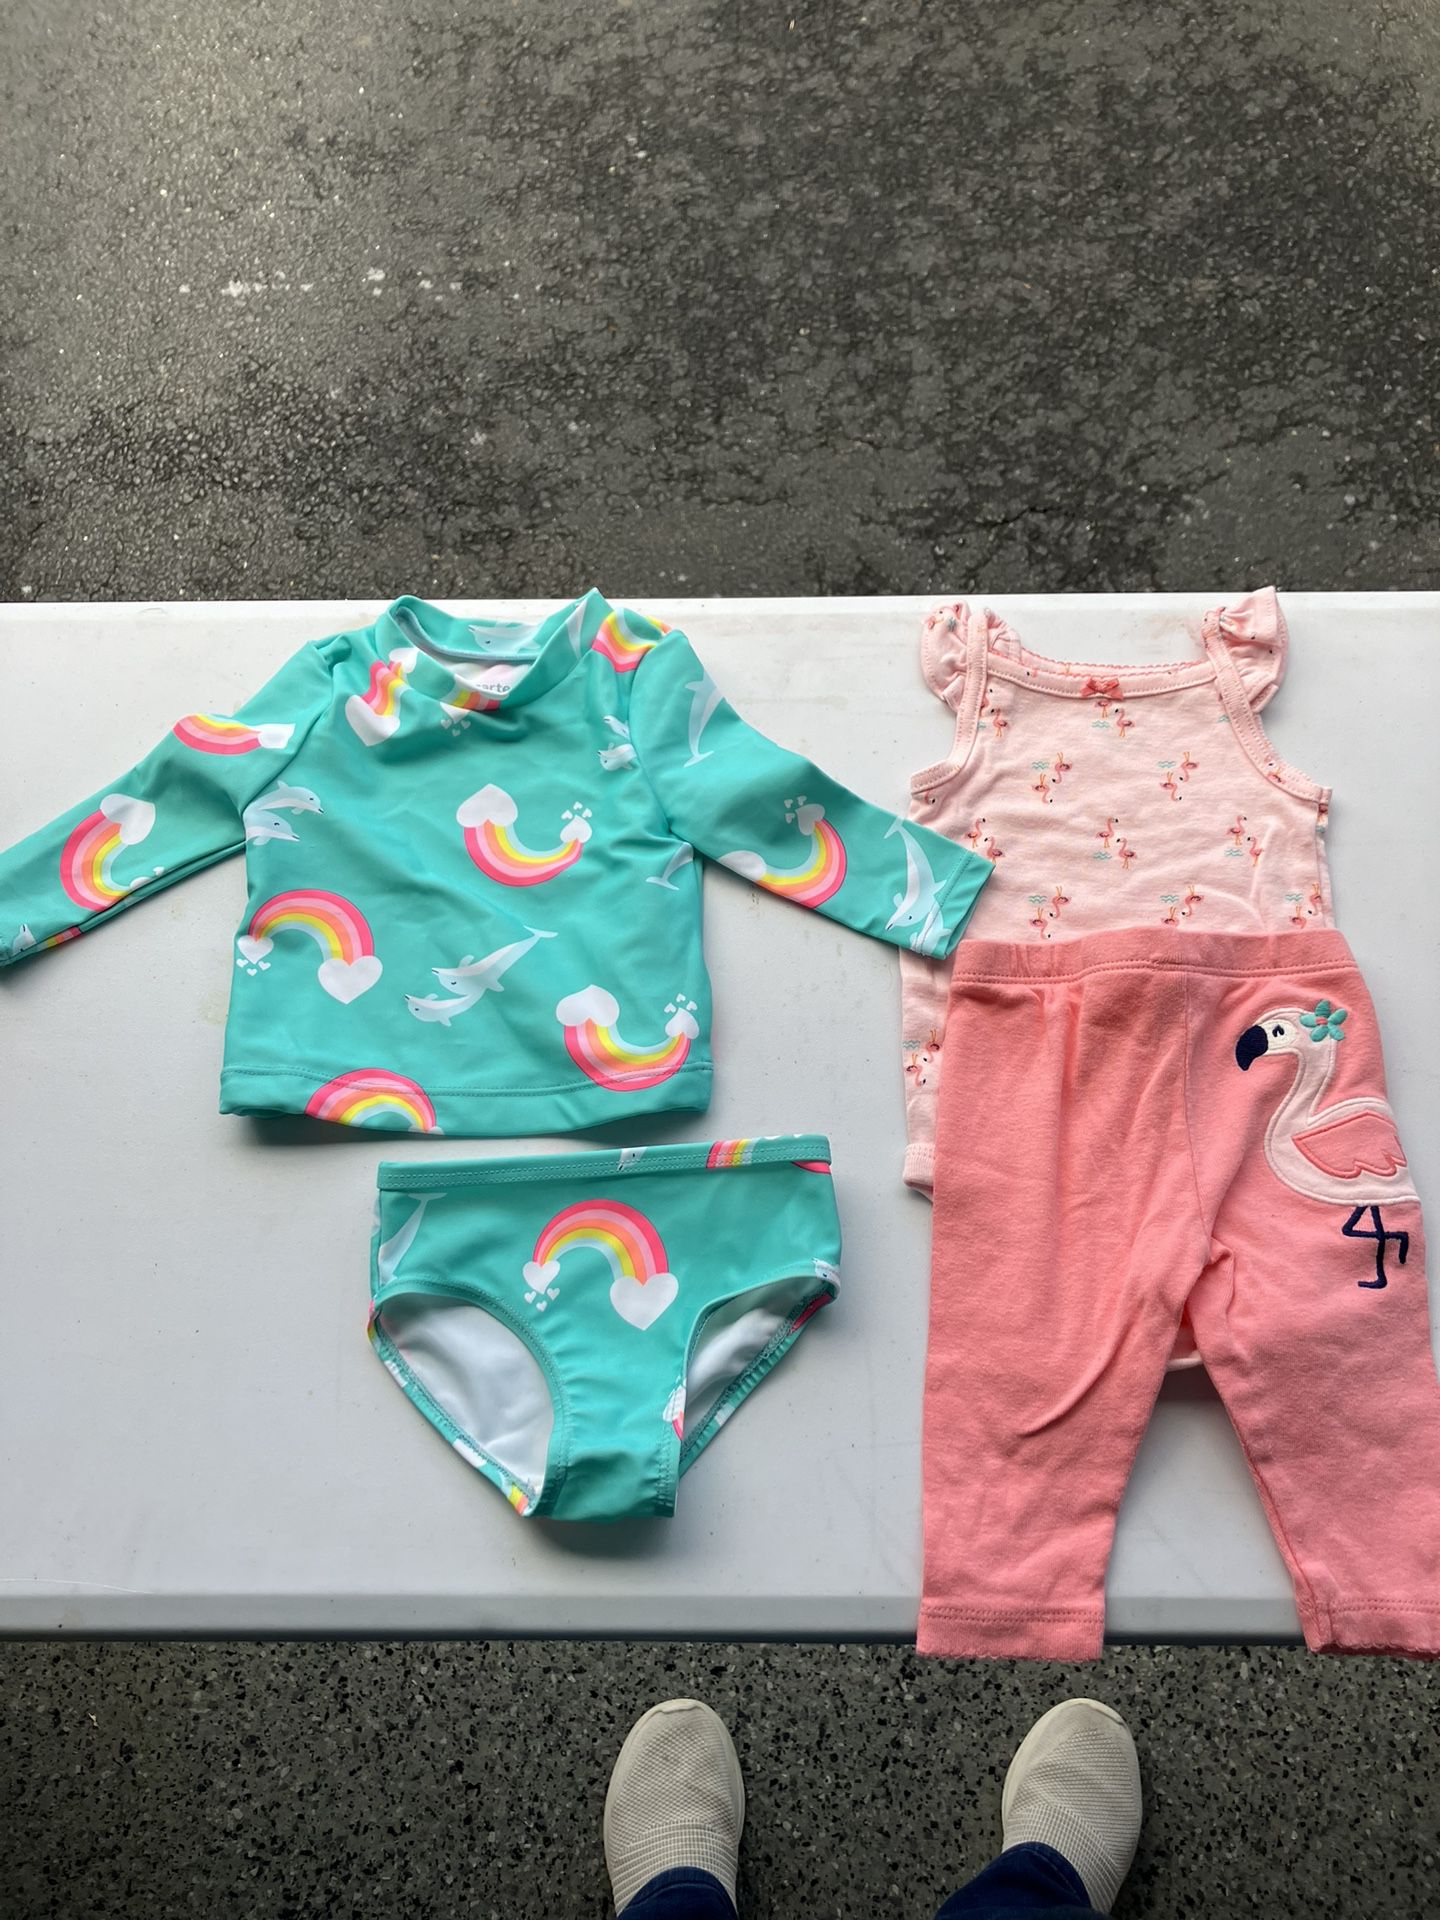 2 3 Month Baby Clothes